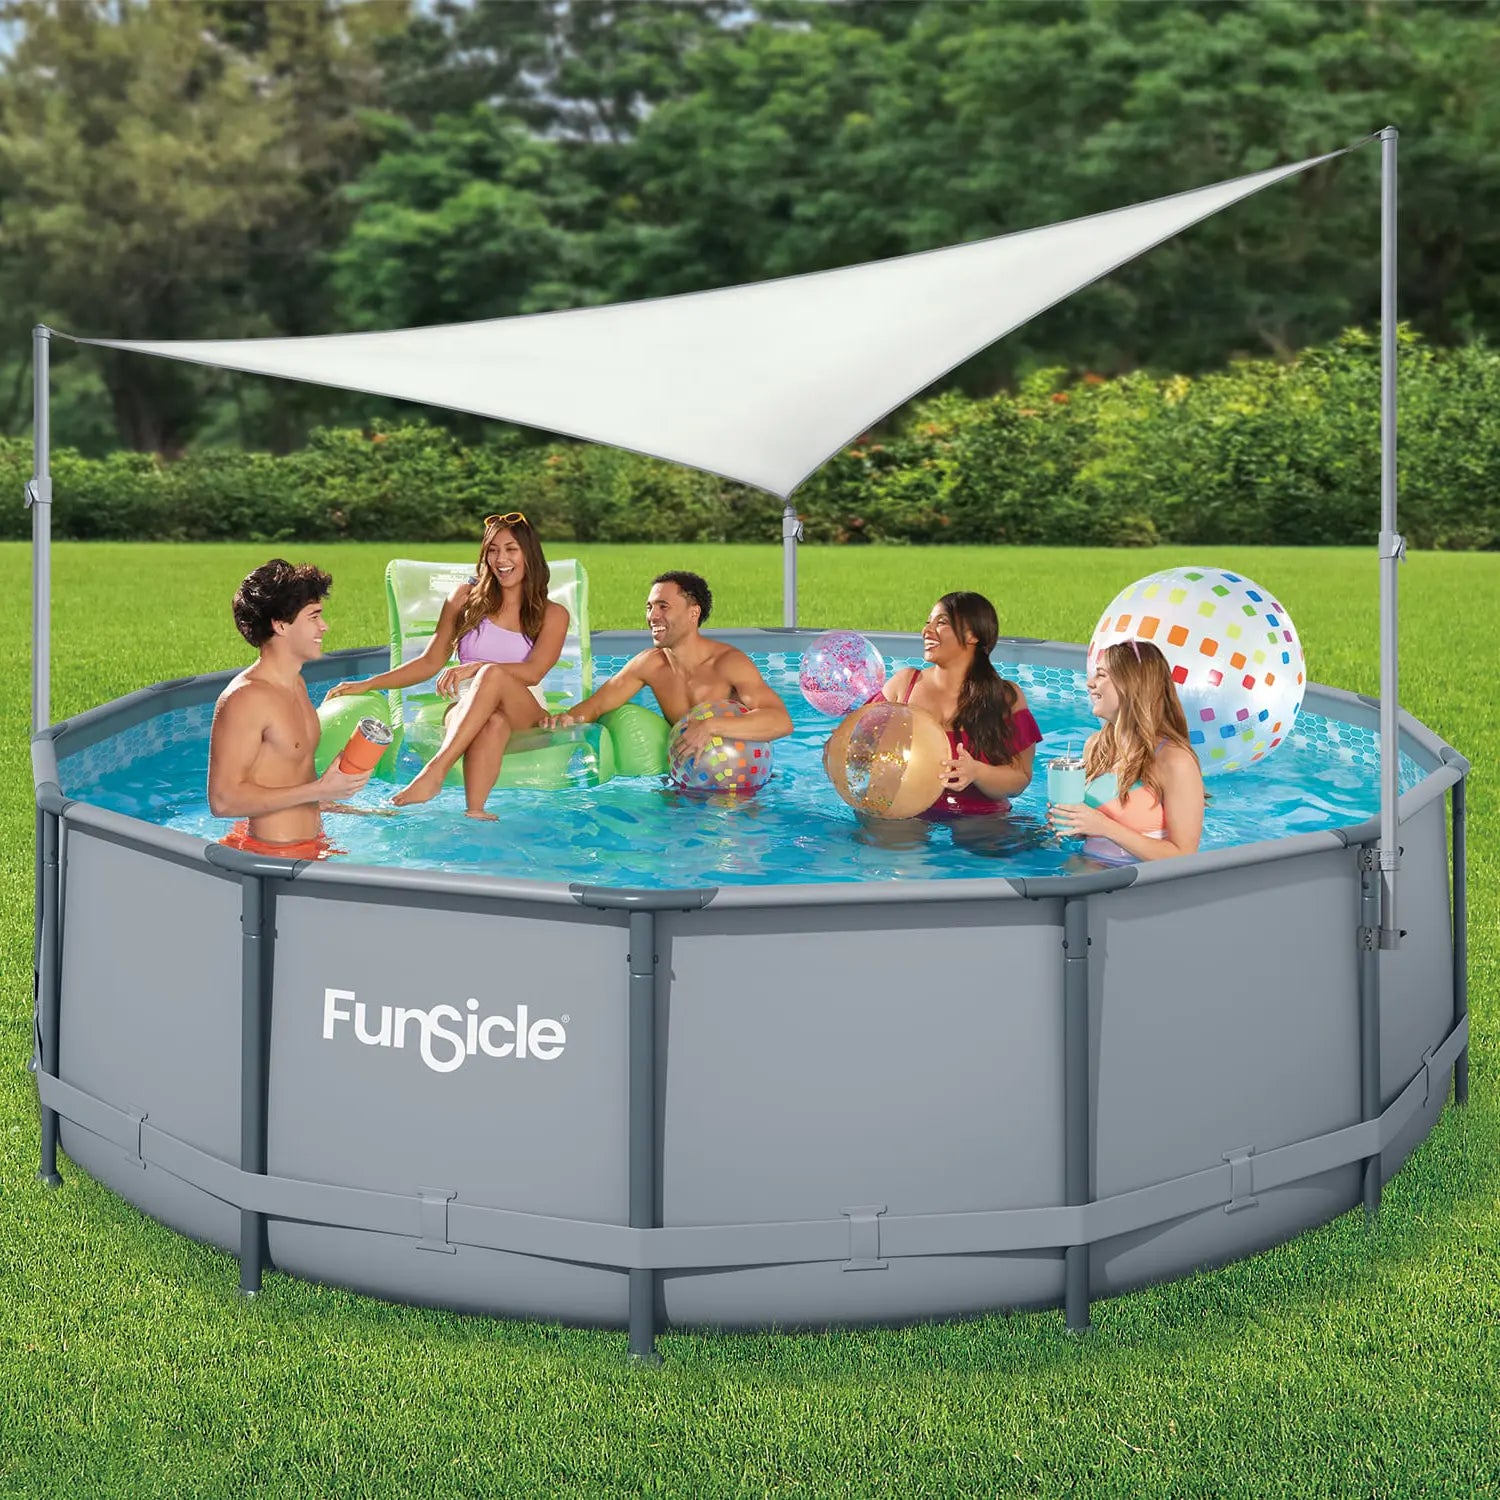 Funsicle Pool Canopy with models in a grass background